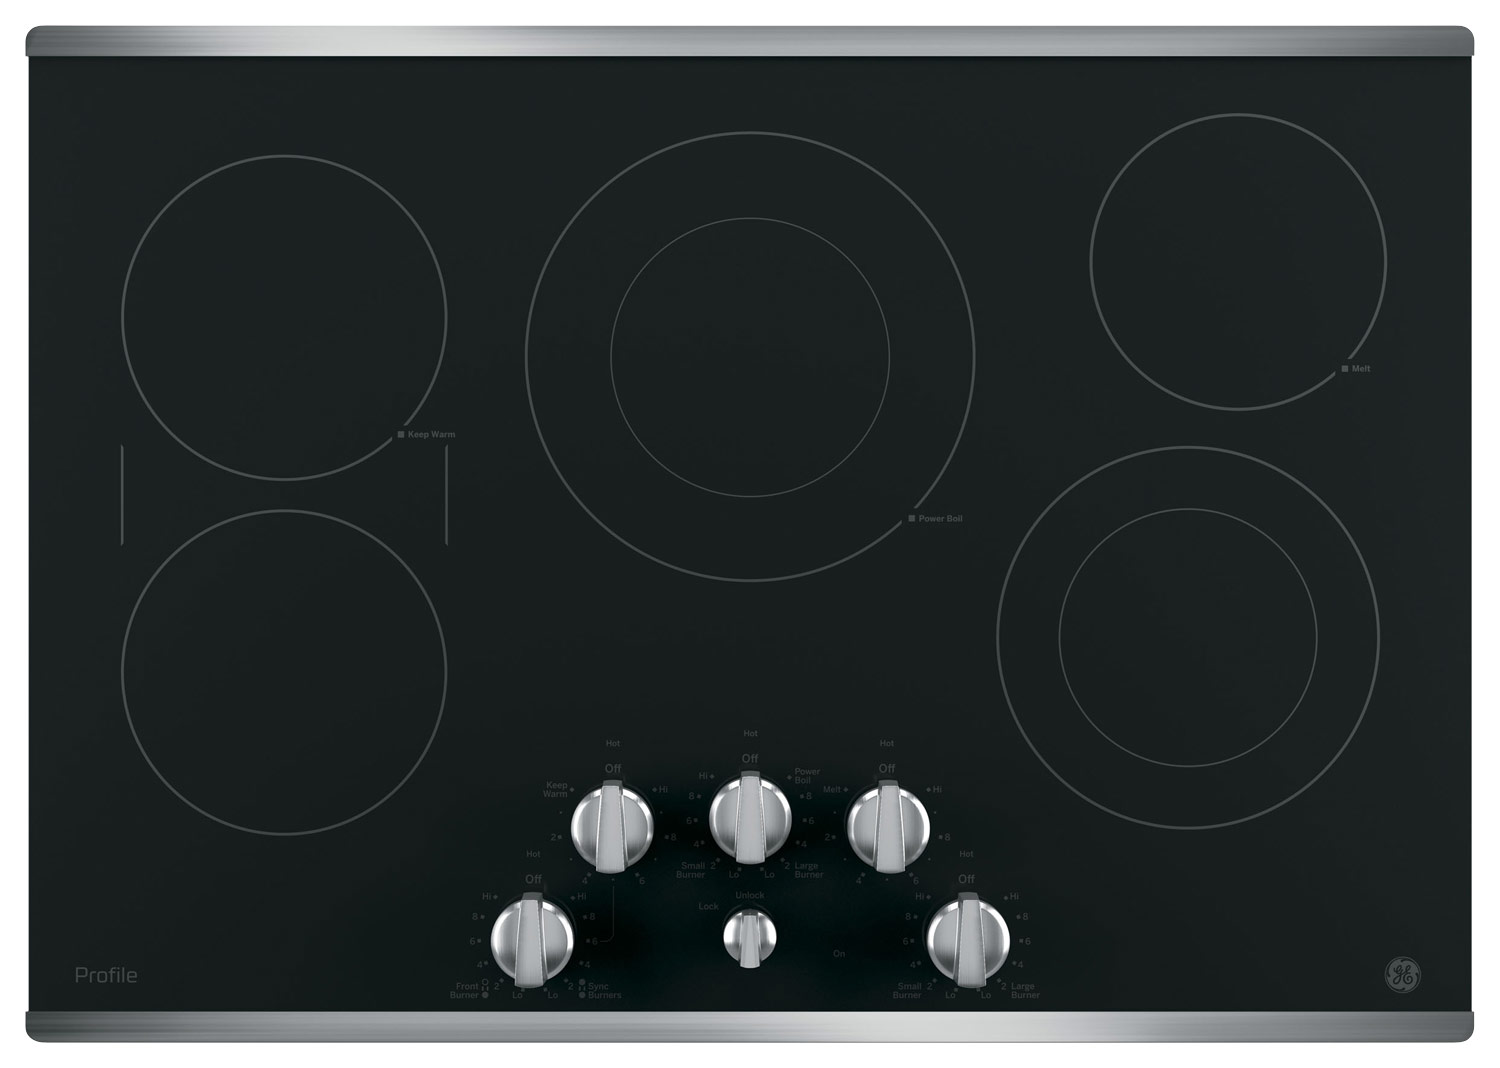 GE Profile - 30" Built-In Electric Cooktop - Stainless steel on black